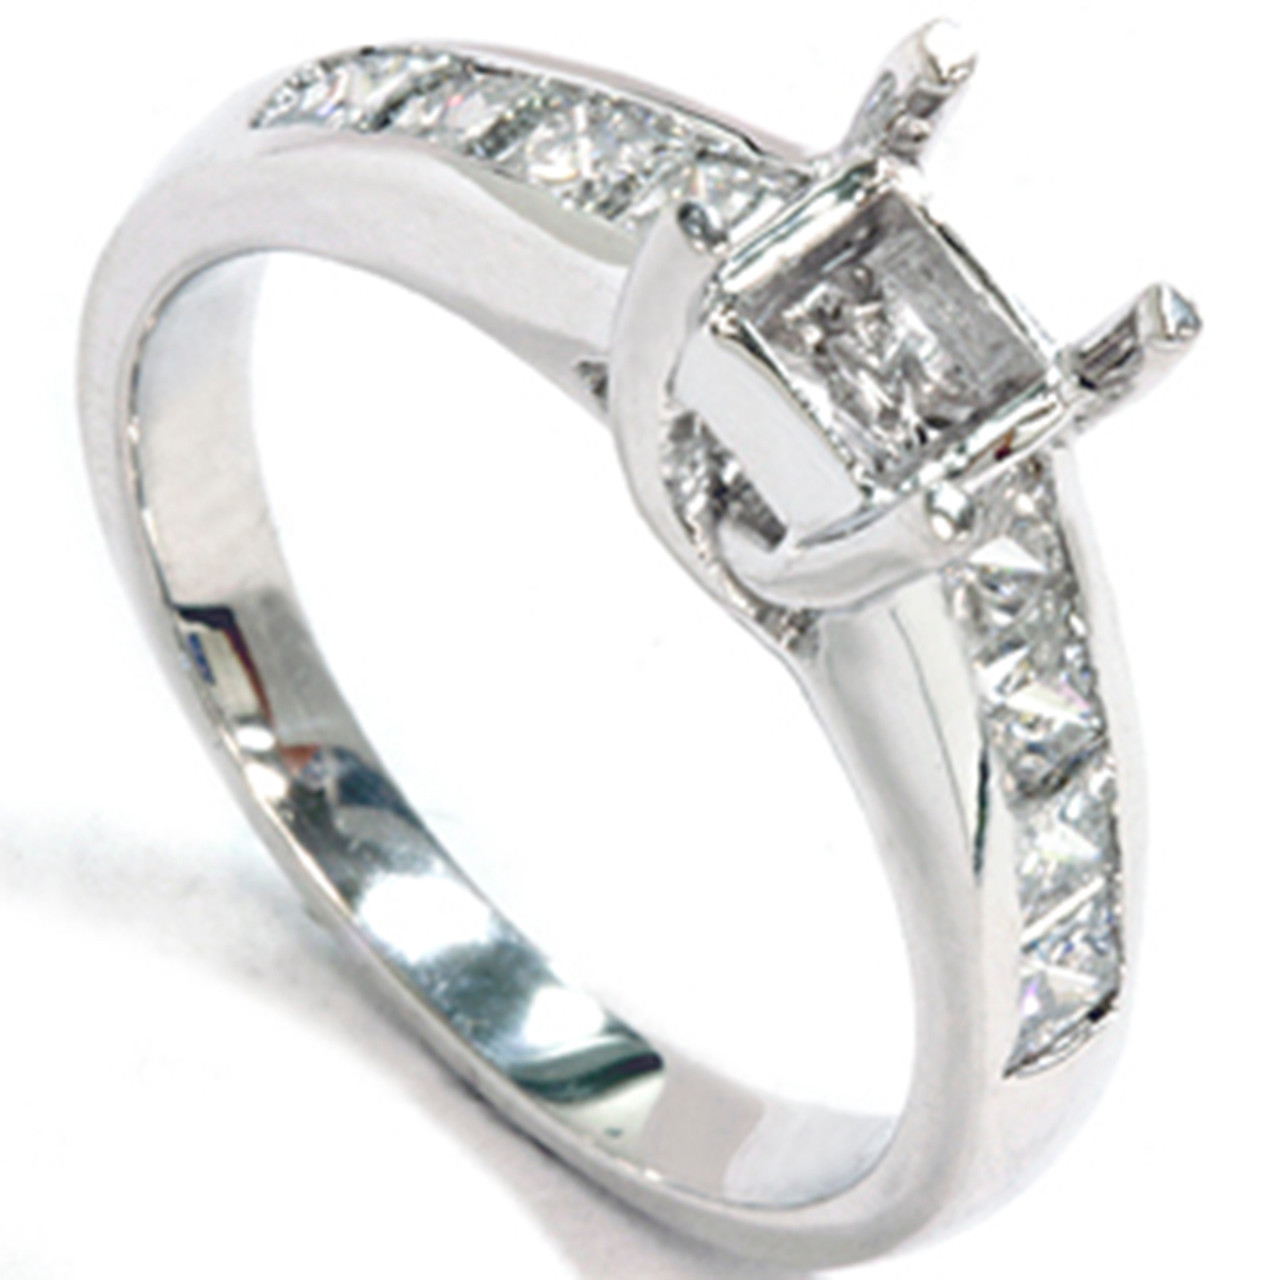 India princess cut diamond engagement rings cathedral setting manufacturers usa